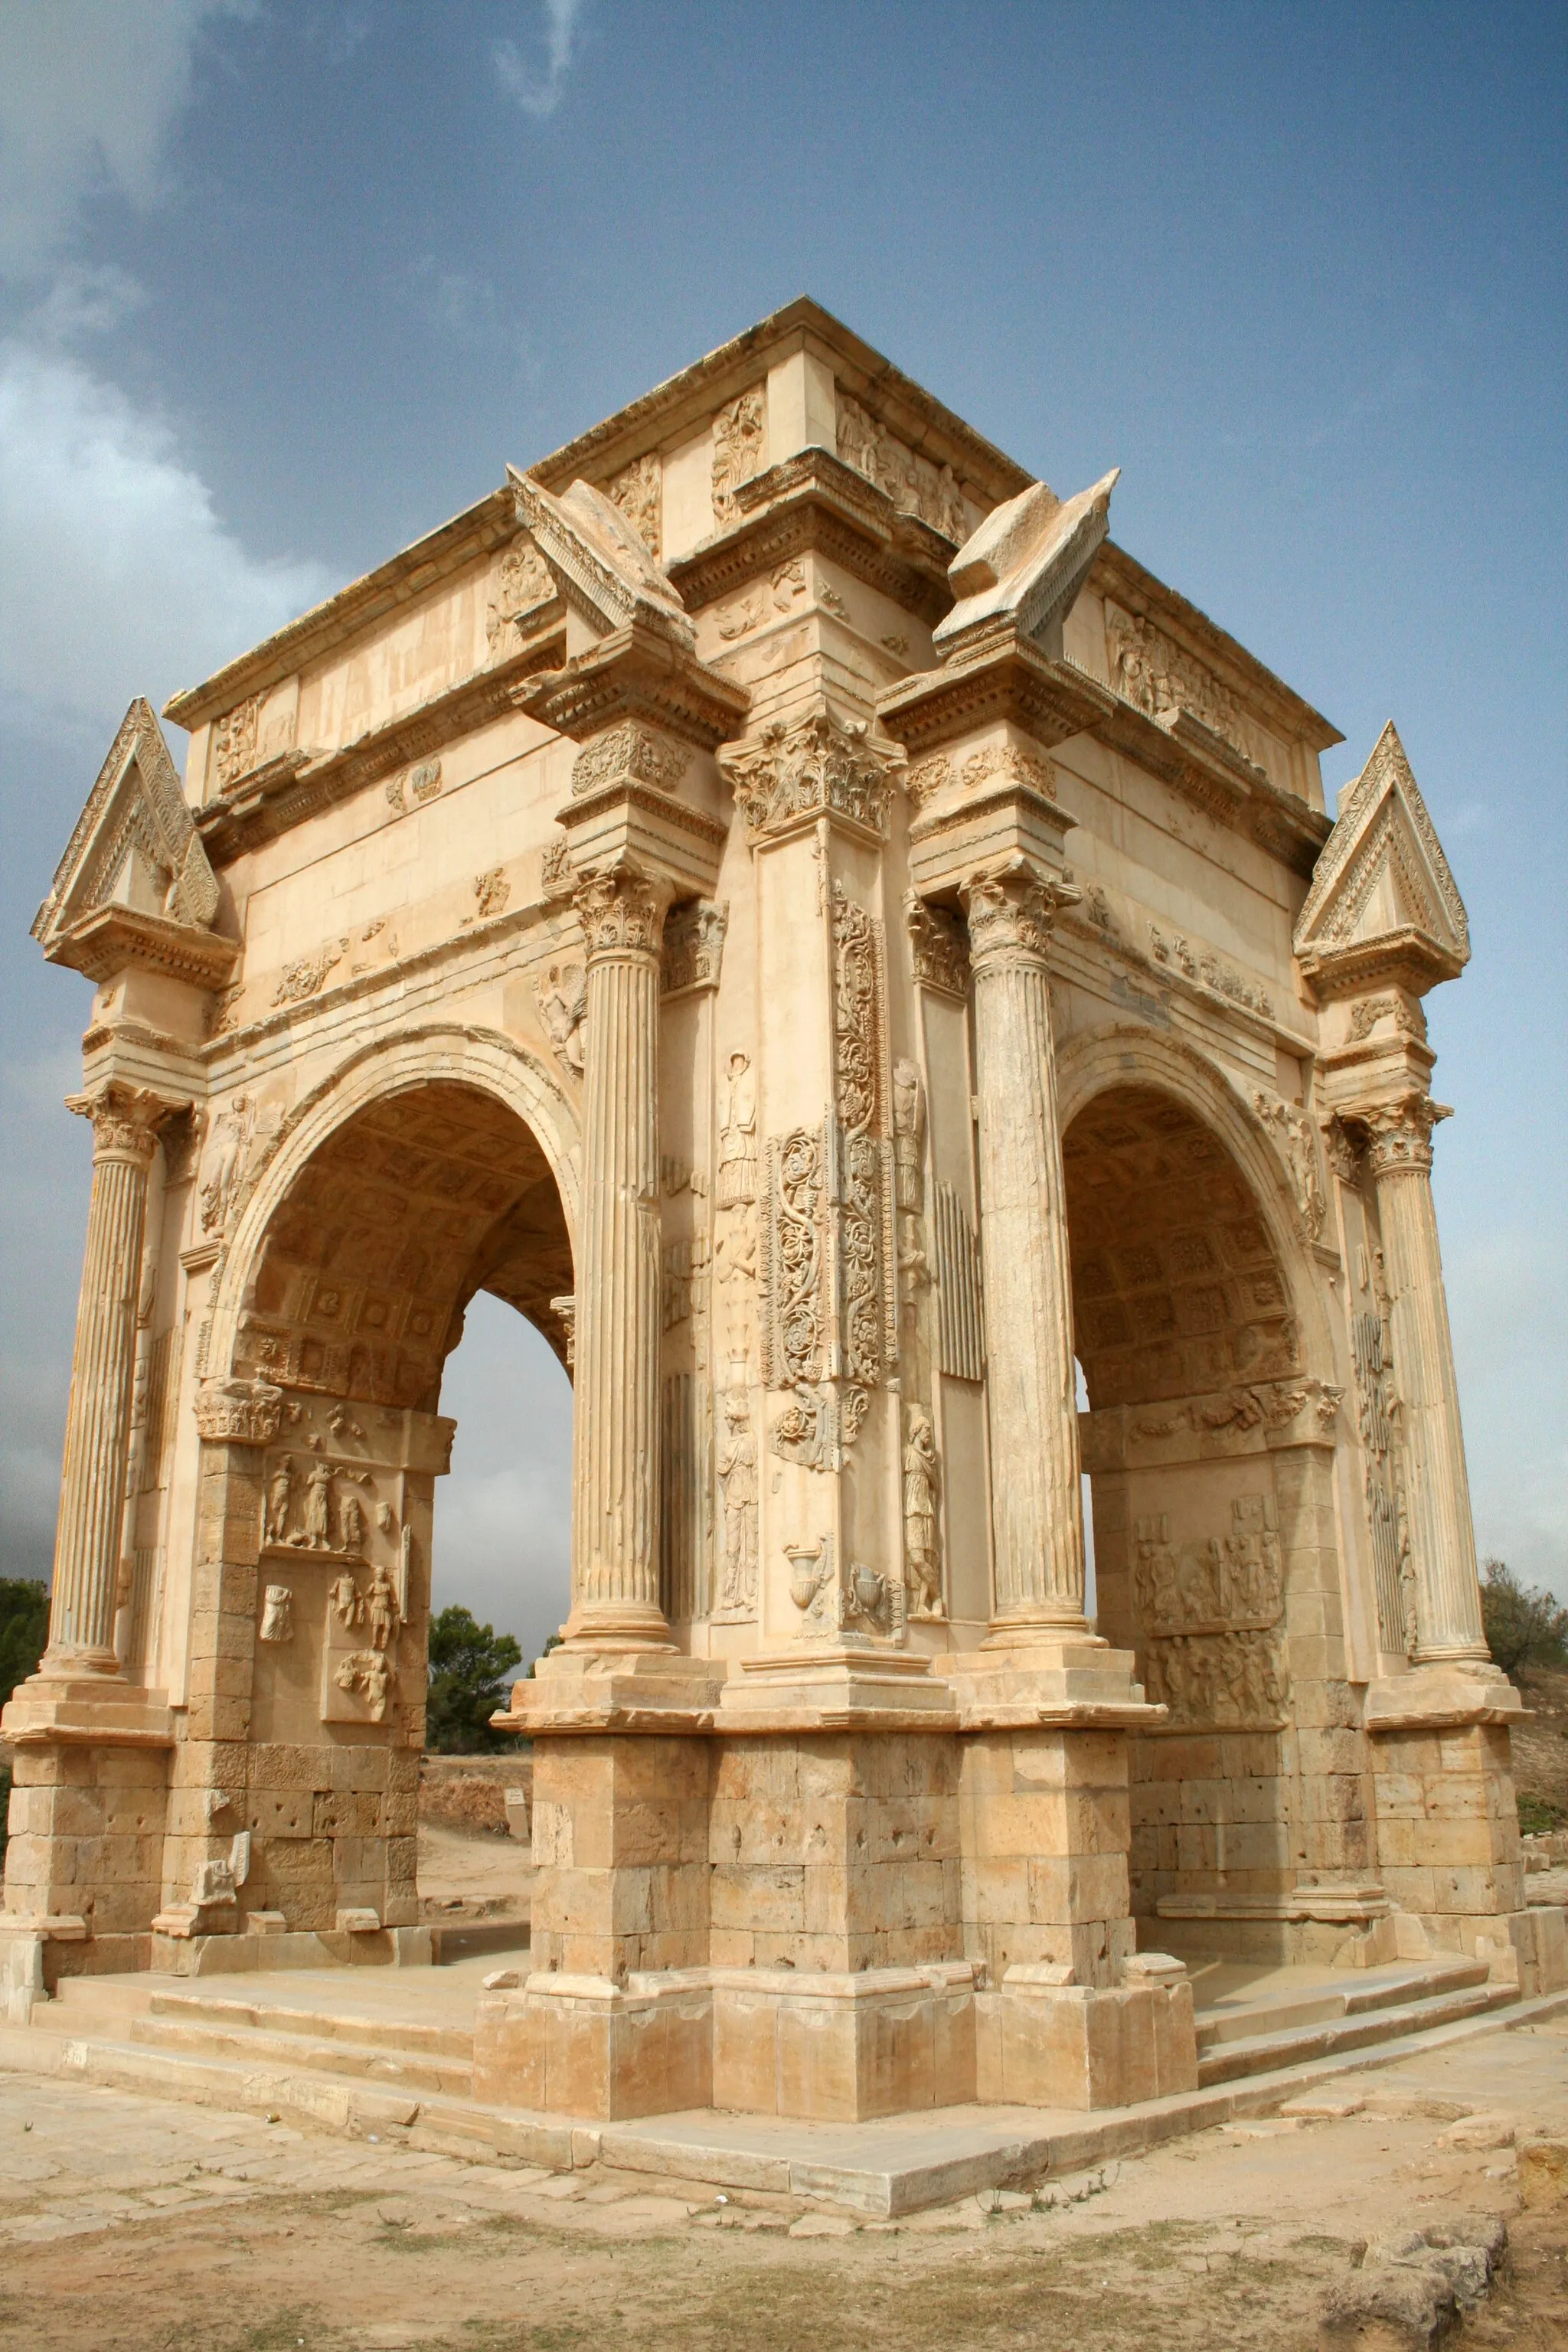 Photo showing: The Arch of Septimius Severus at Leptis Magna, Libya